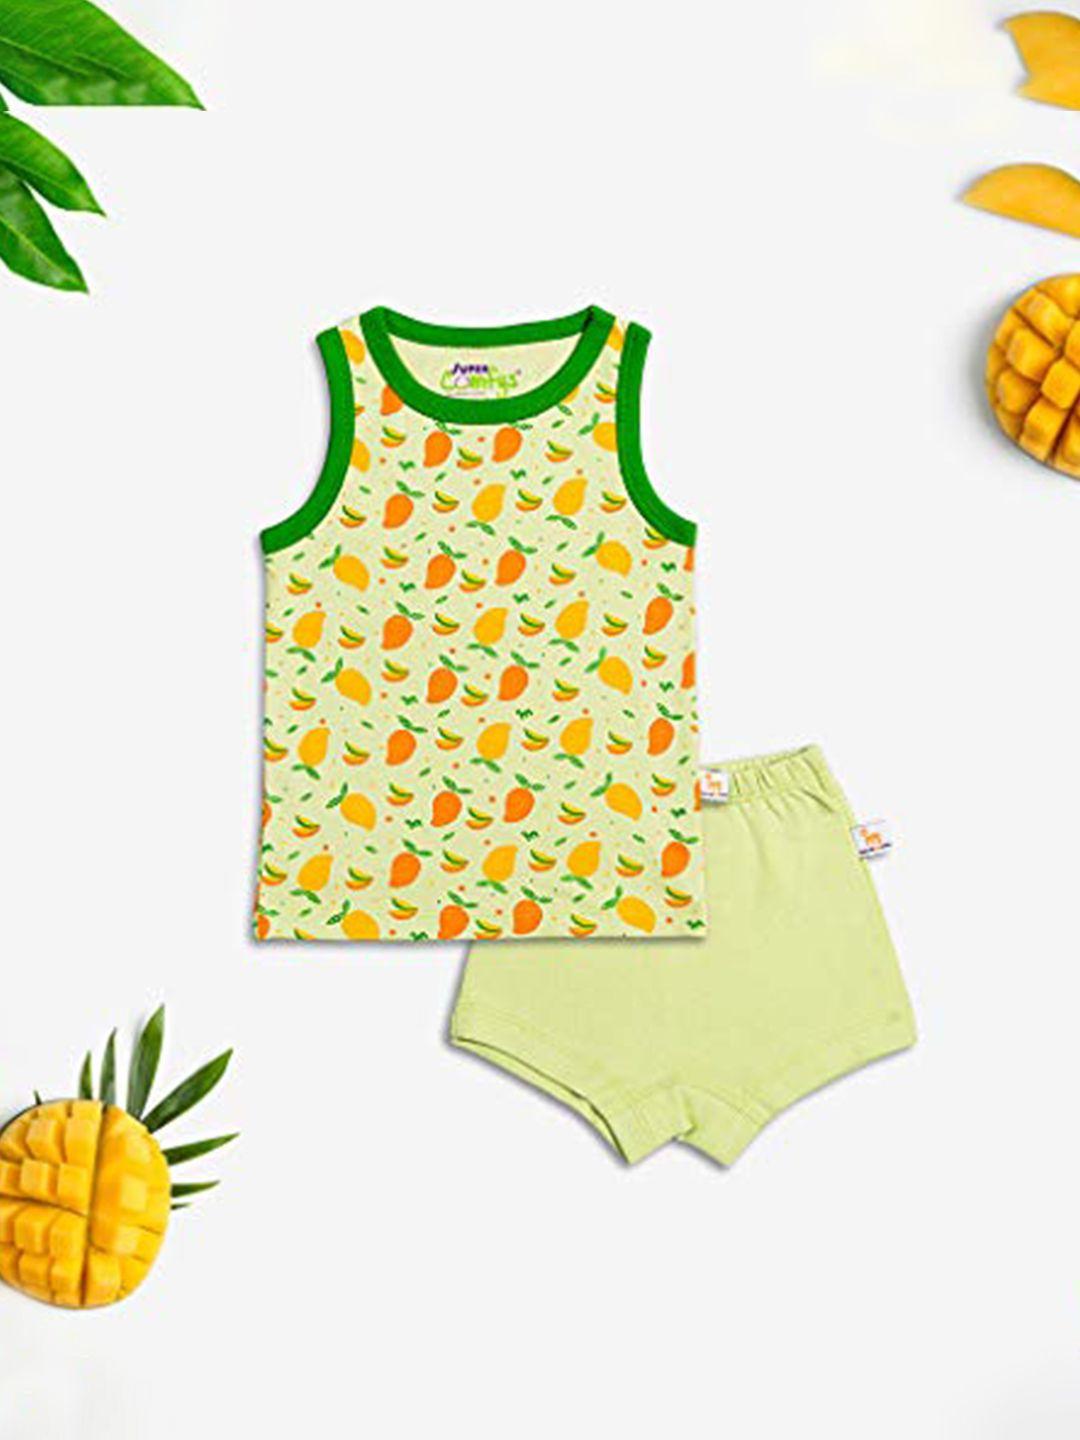 superbottoms unisex kids yellow & green printed sustainable co-ords set